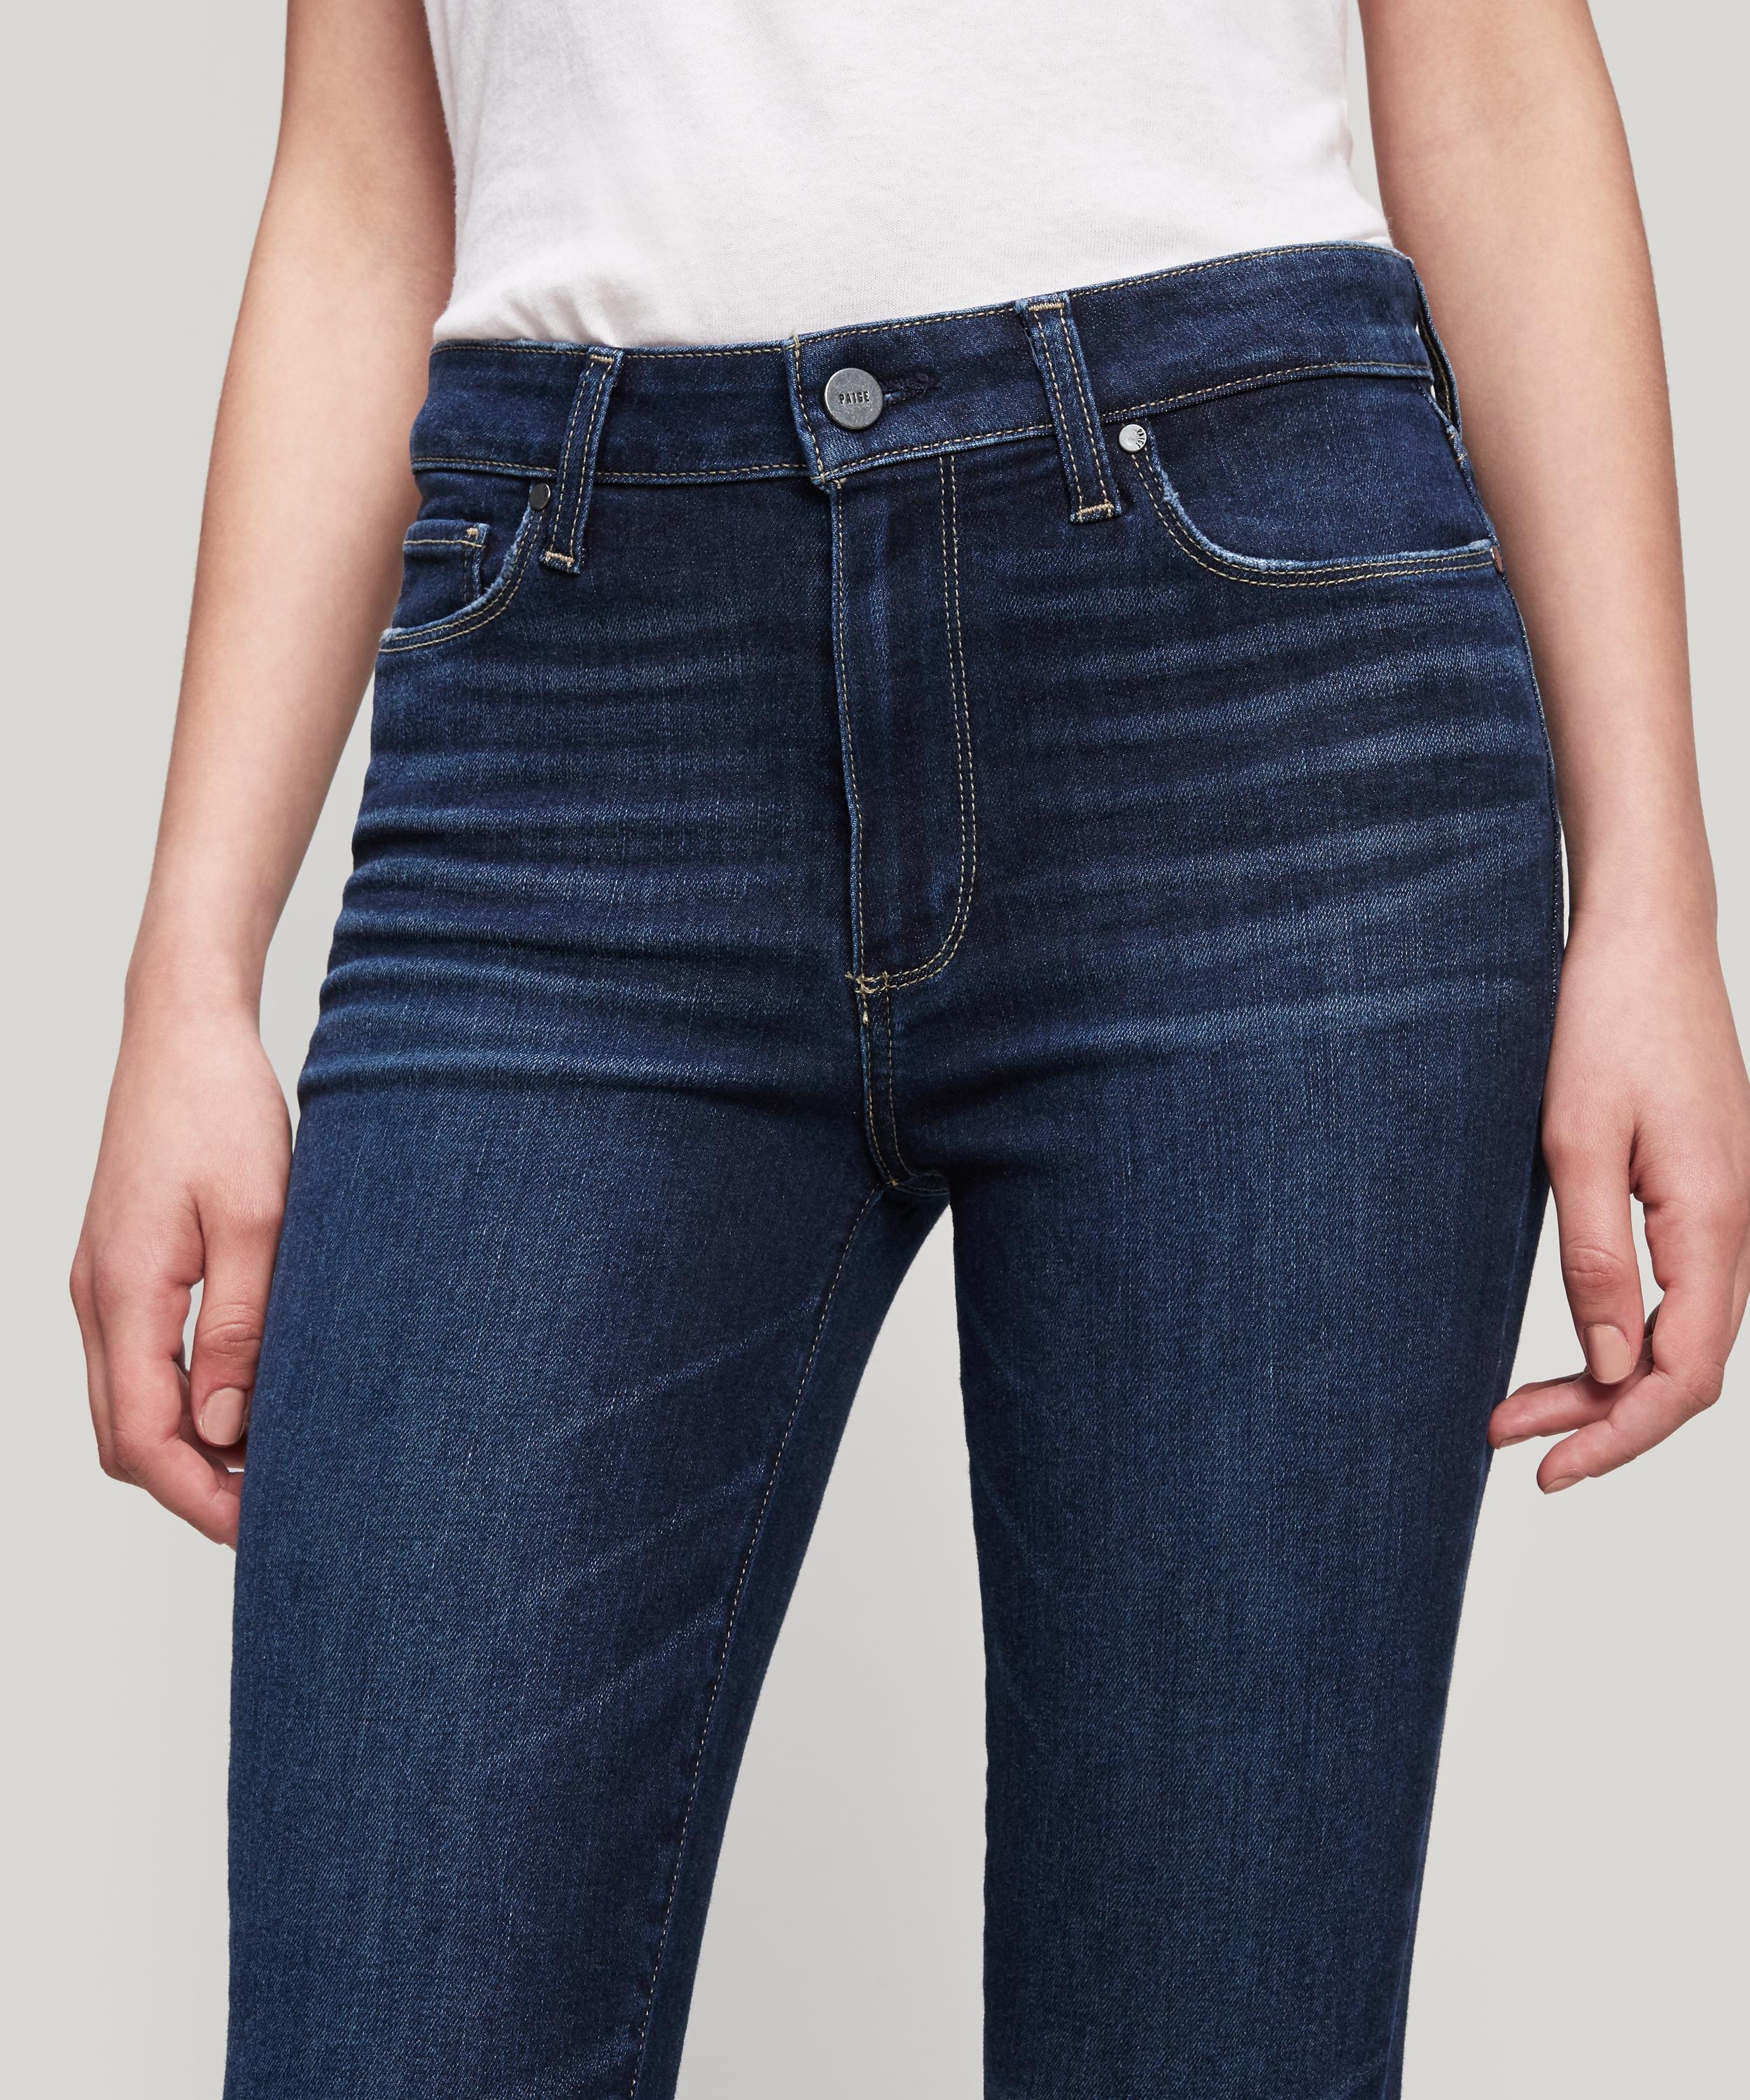 paige hoxton high rise ultra skinny